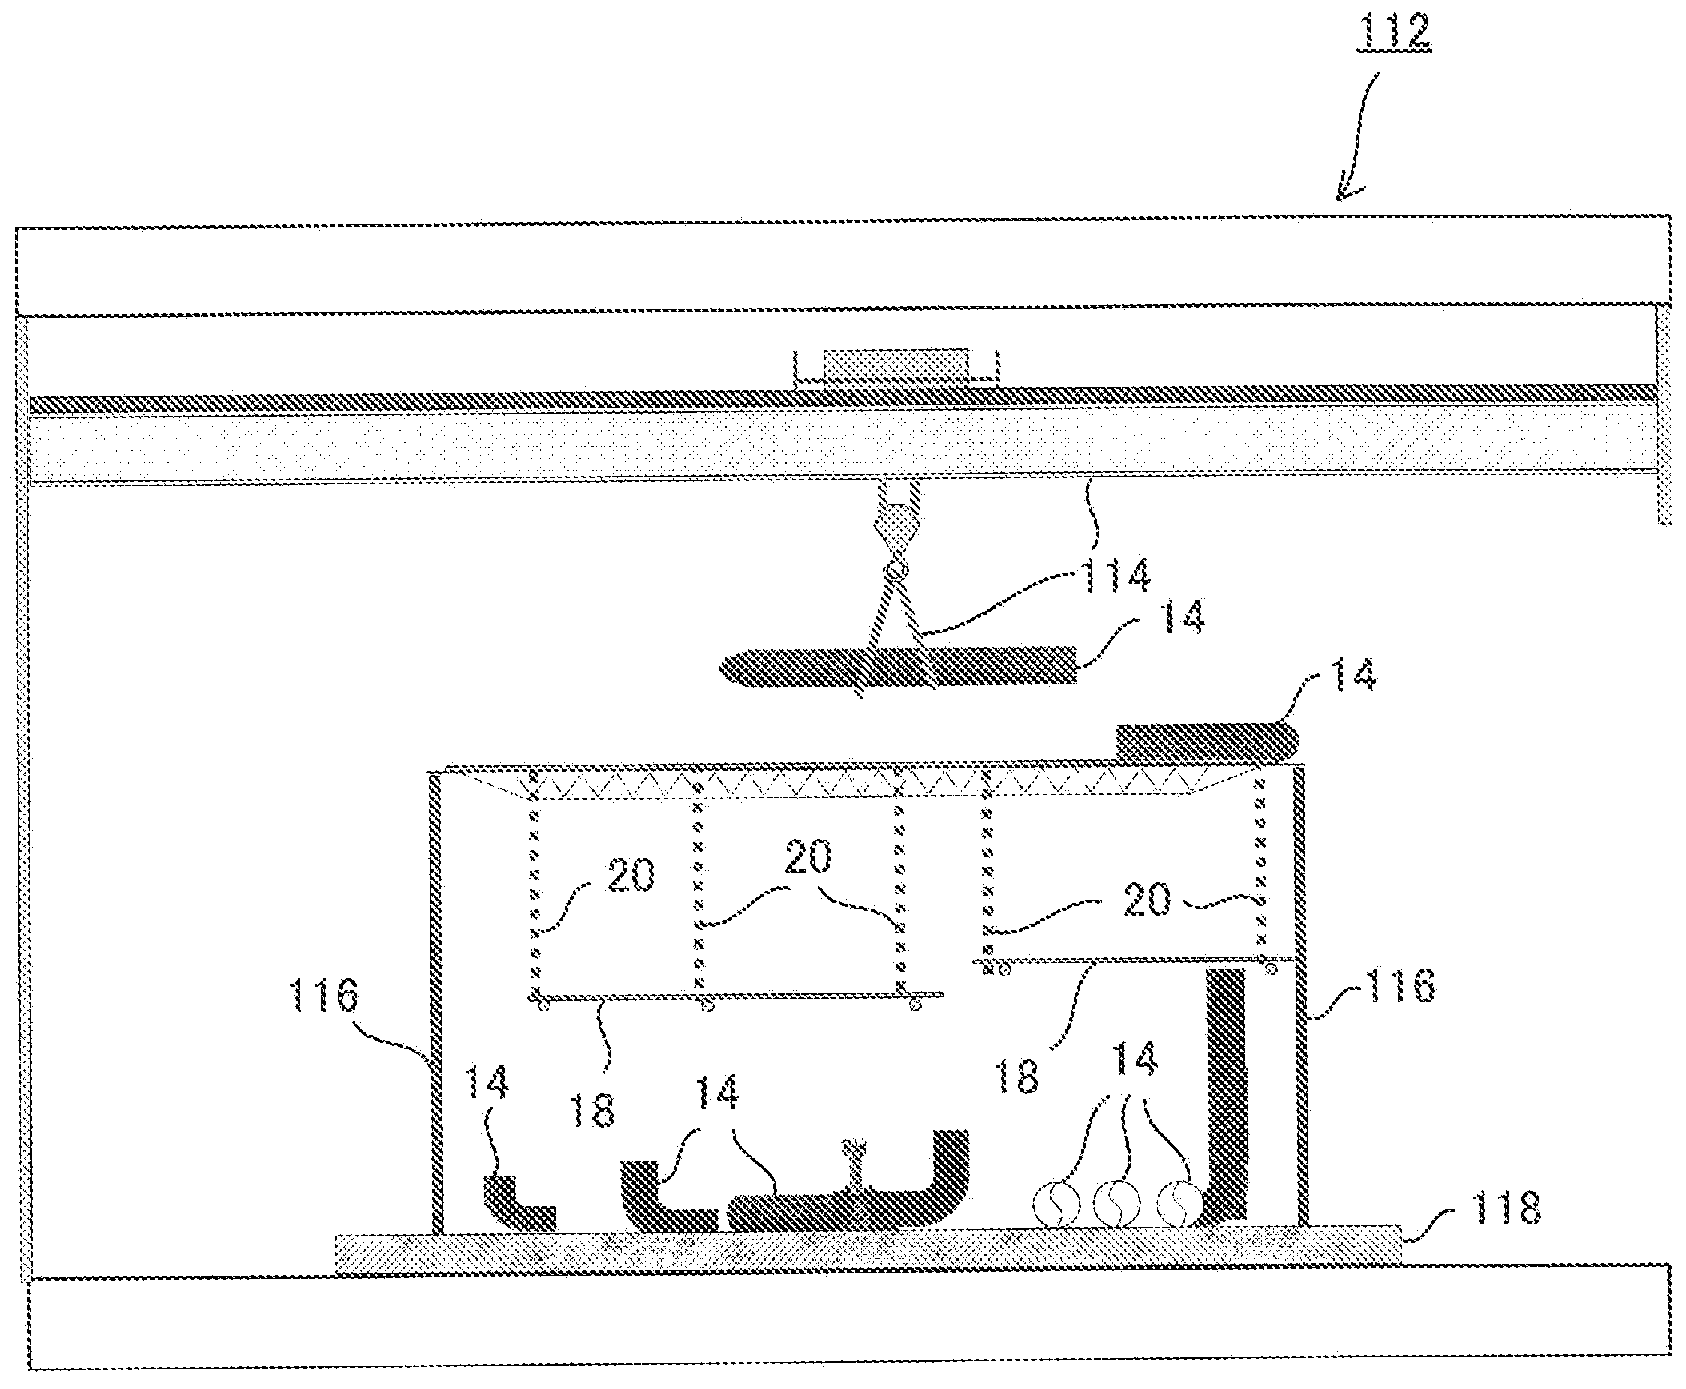 Module structure, and module construction method